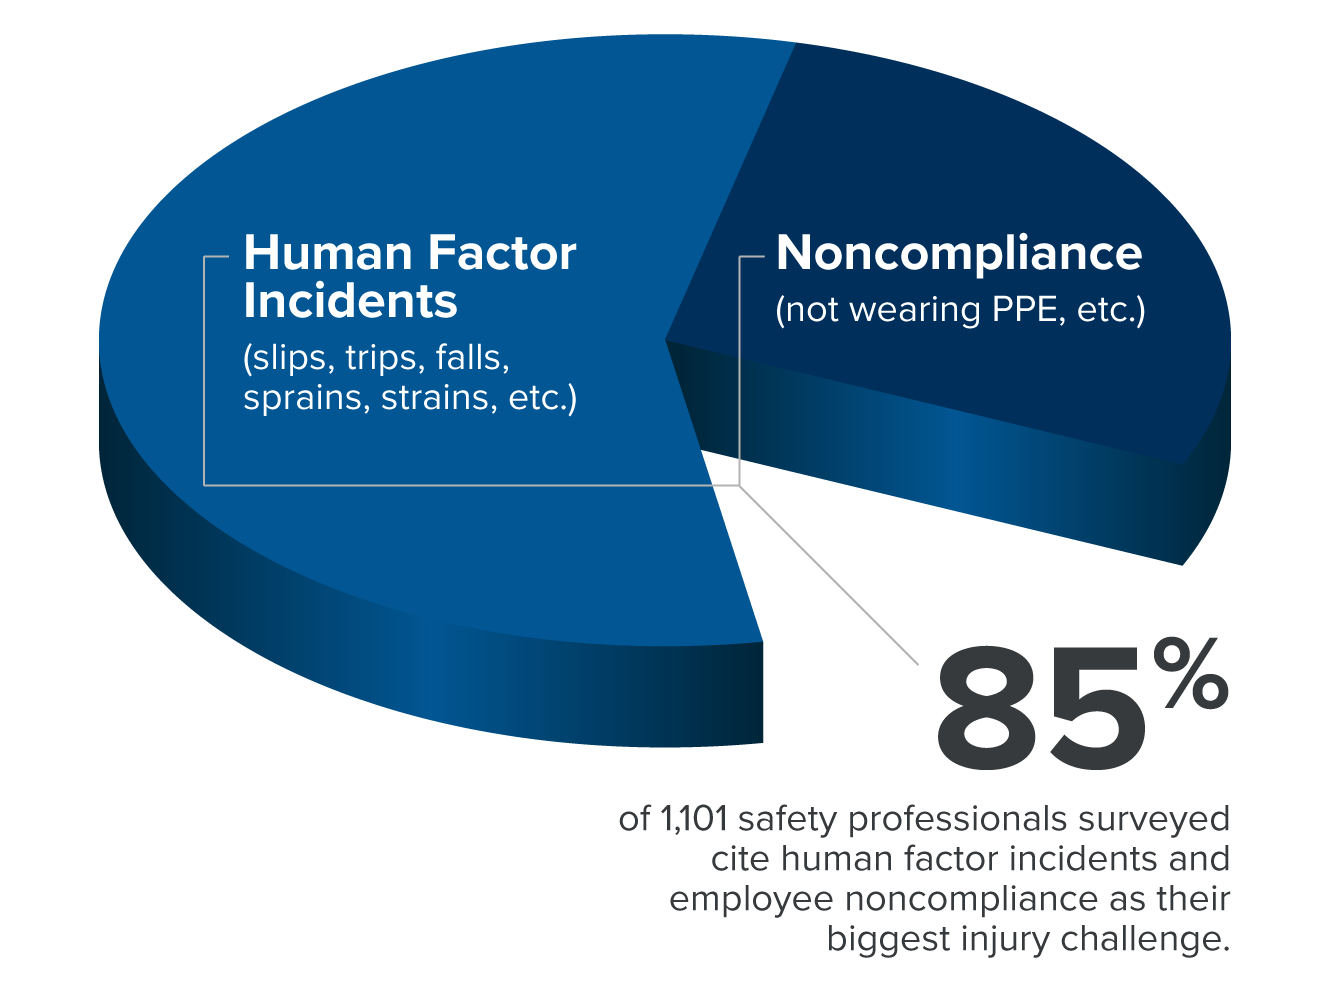 Human Factor Incidents and Noncompliance - a common problem